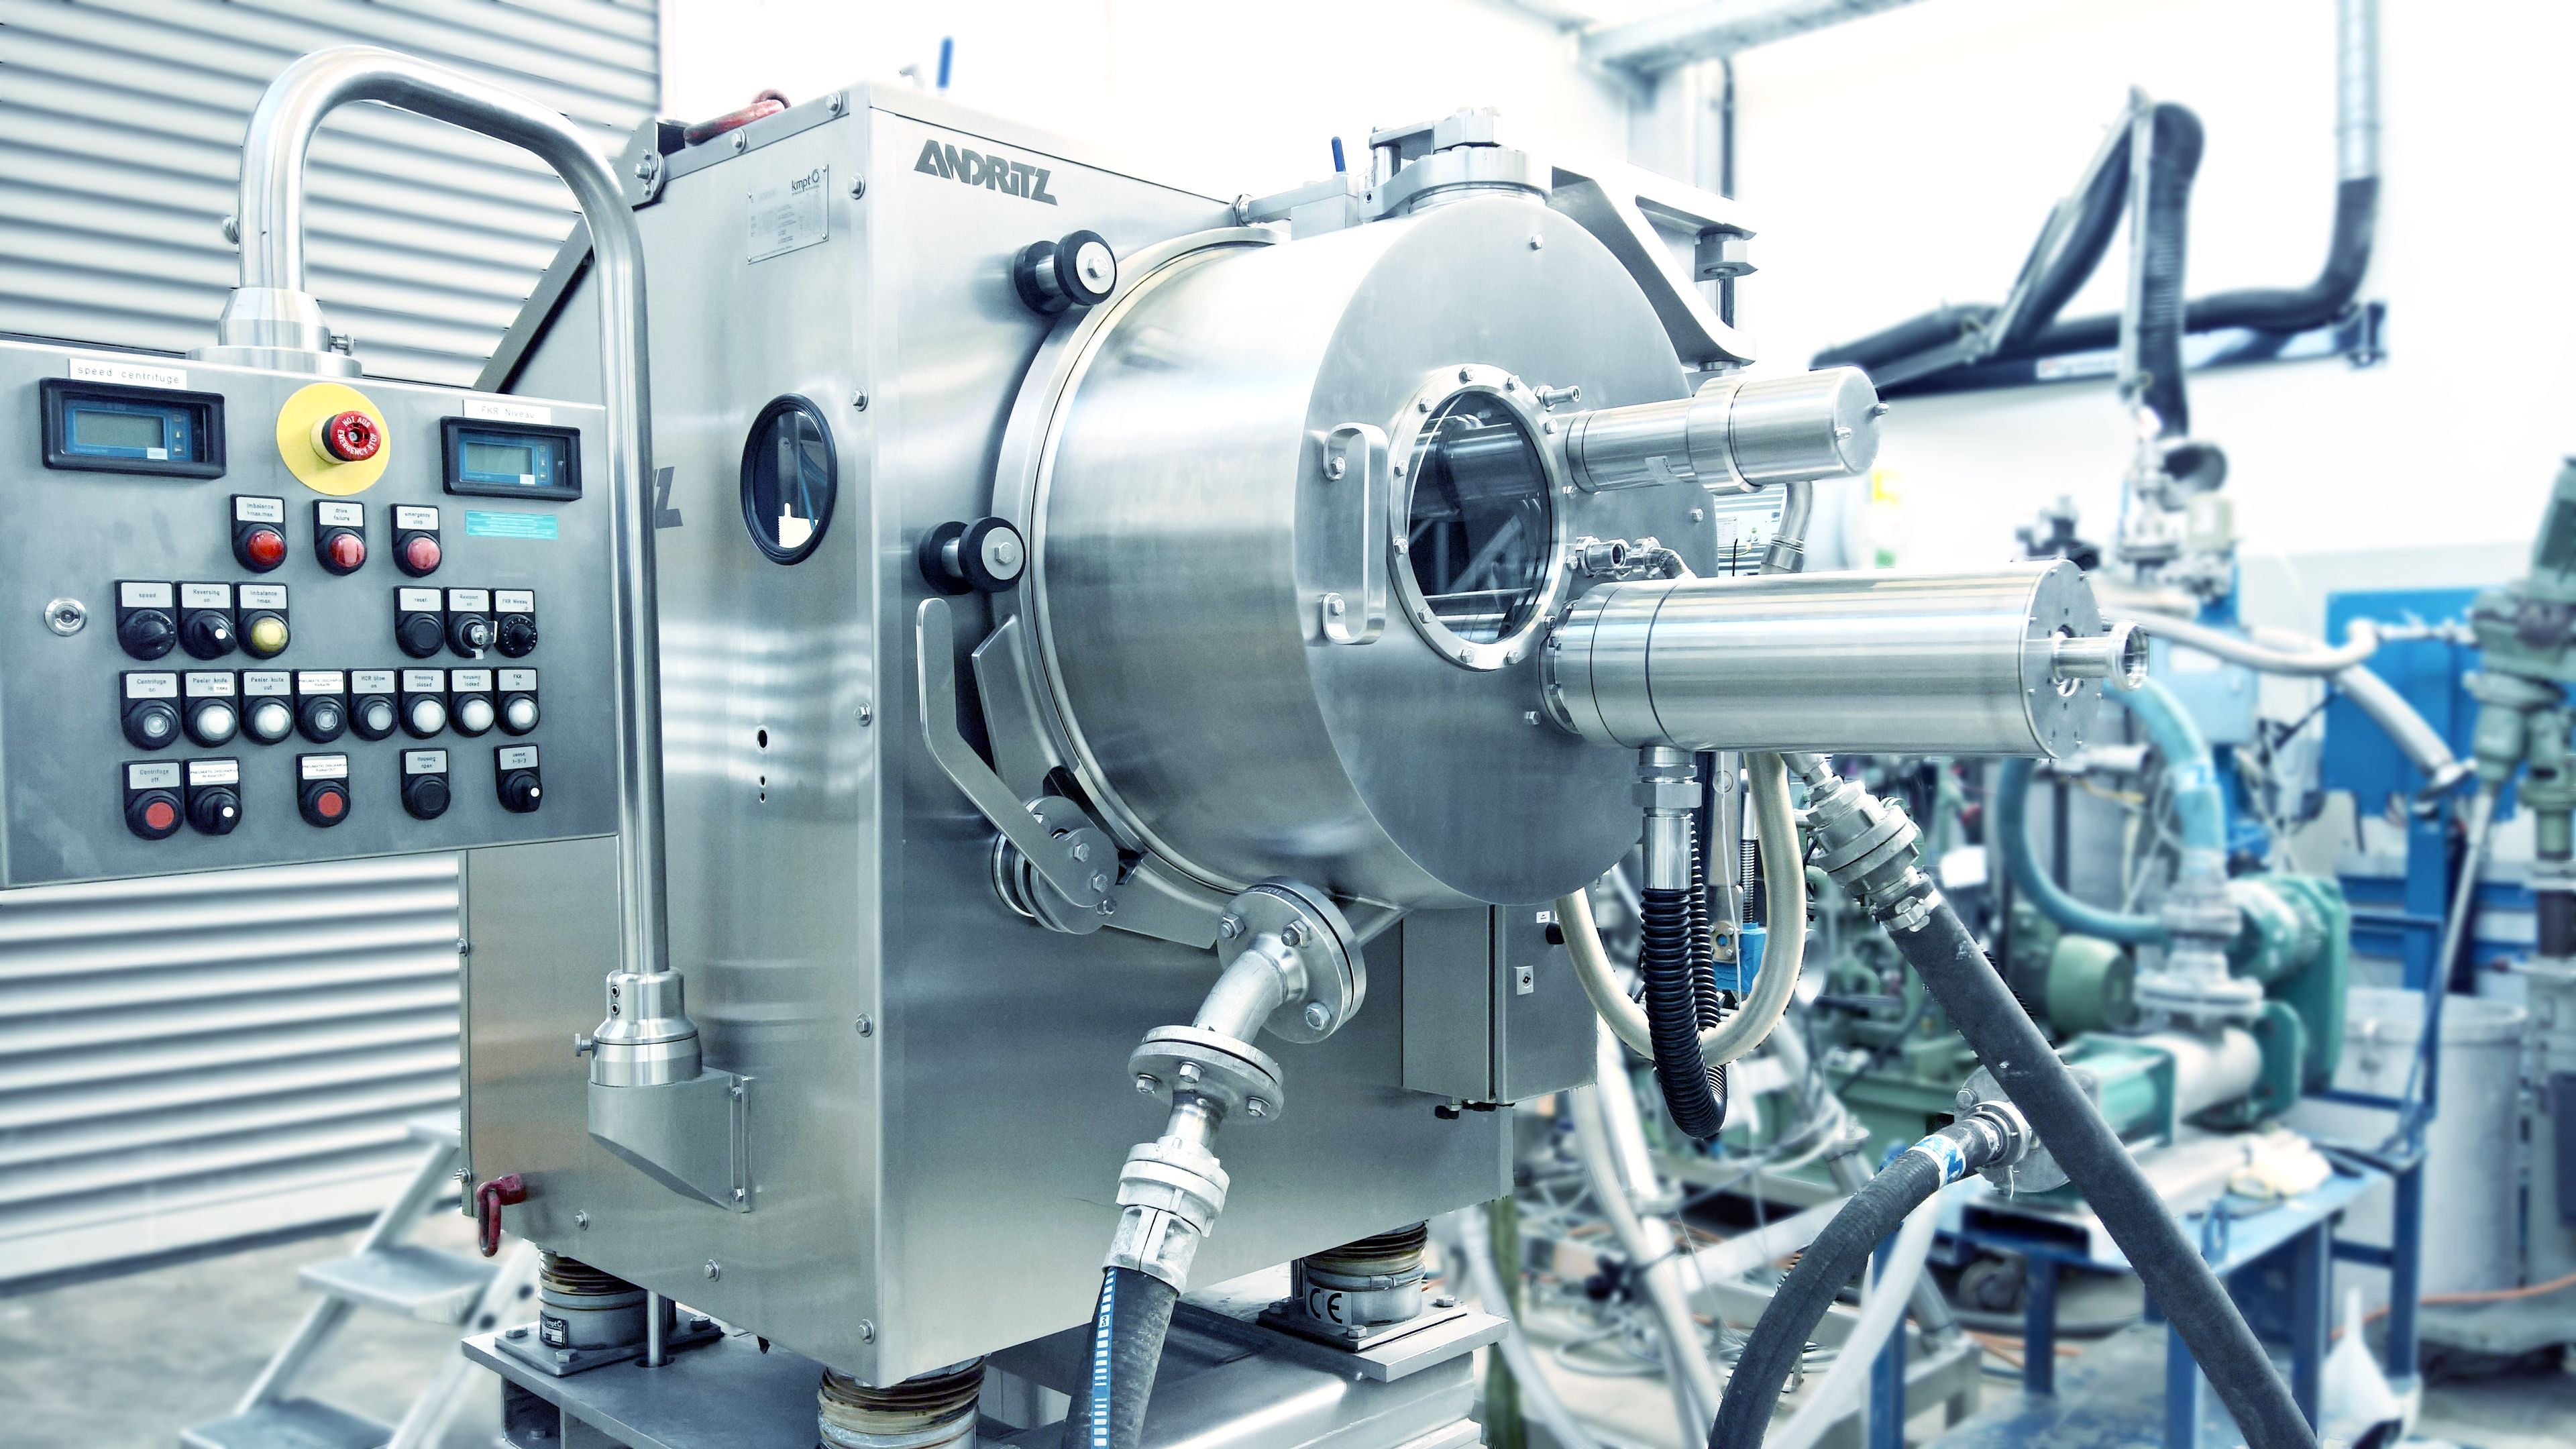 Krauss-Maffei peeler centrifuge equipped with the recently launched pneumatic discharge system.  (Image: ANDRITZ)